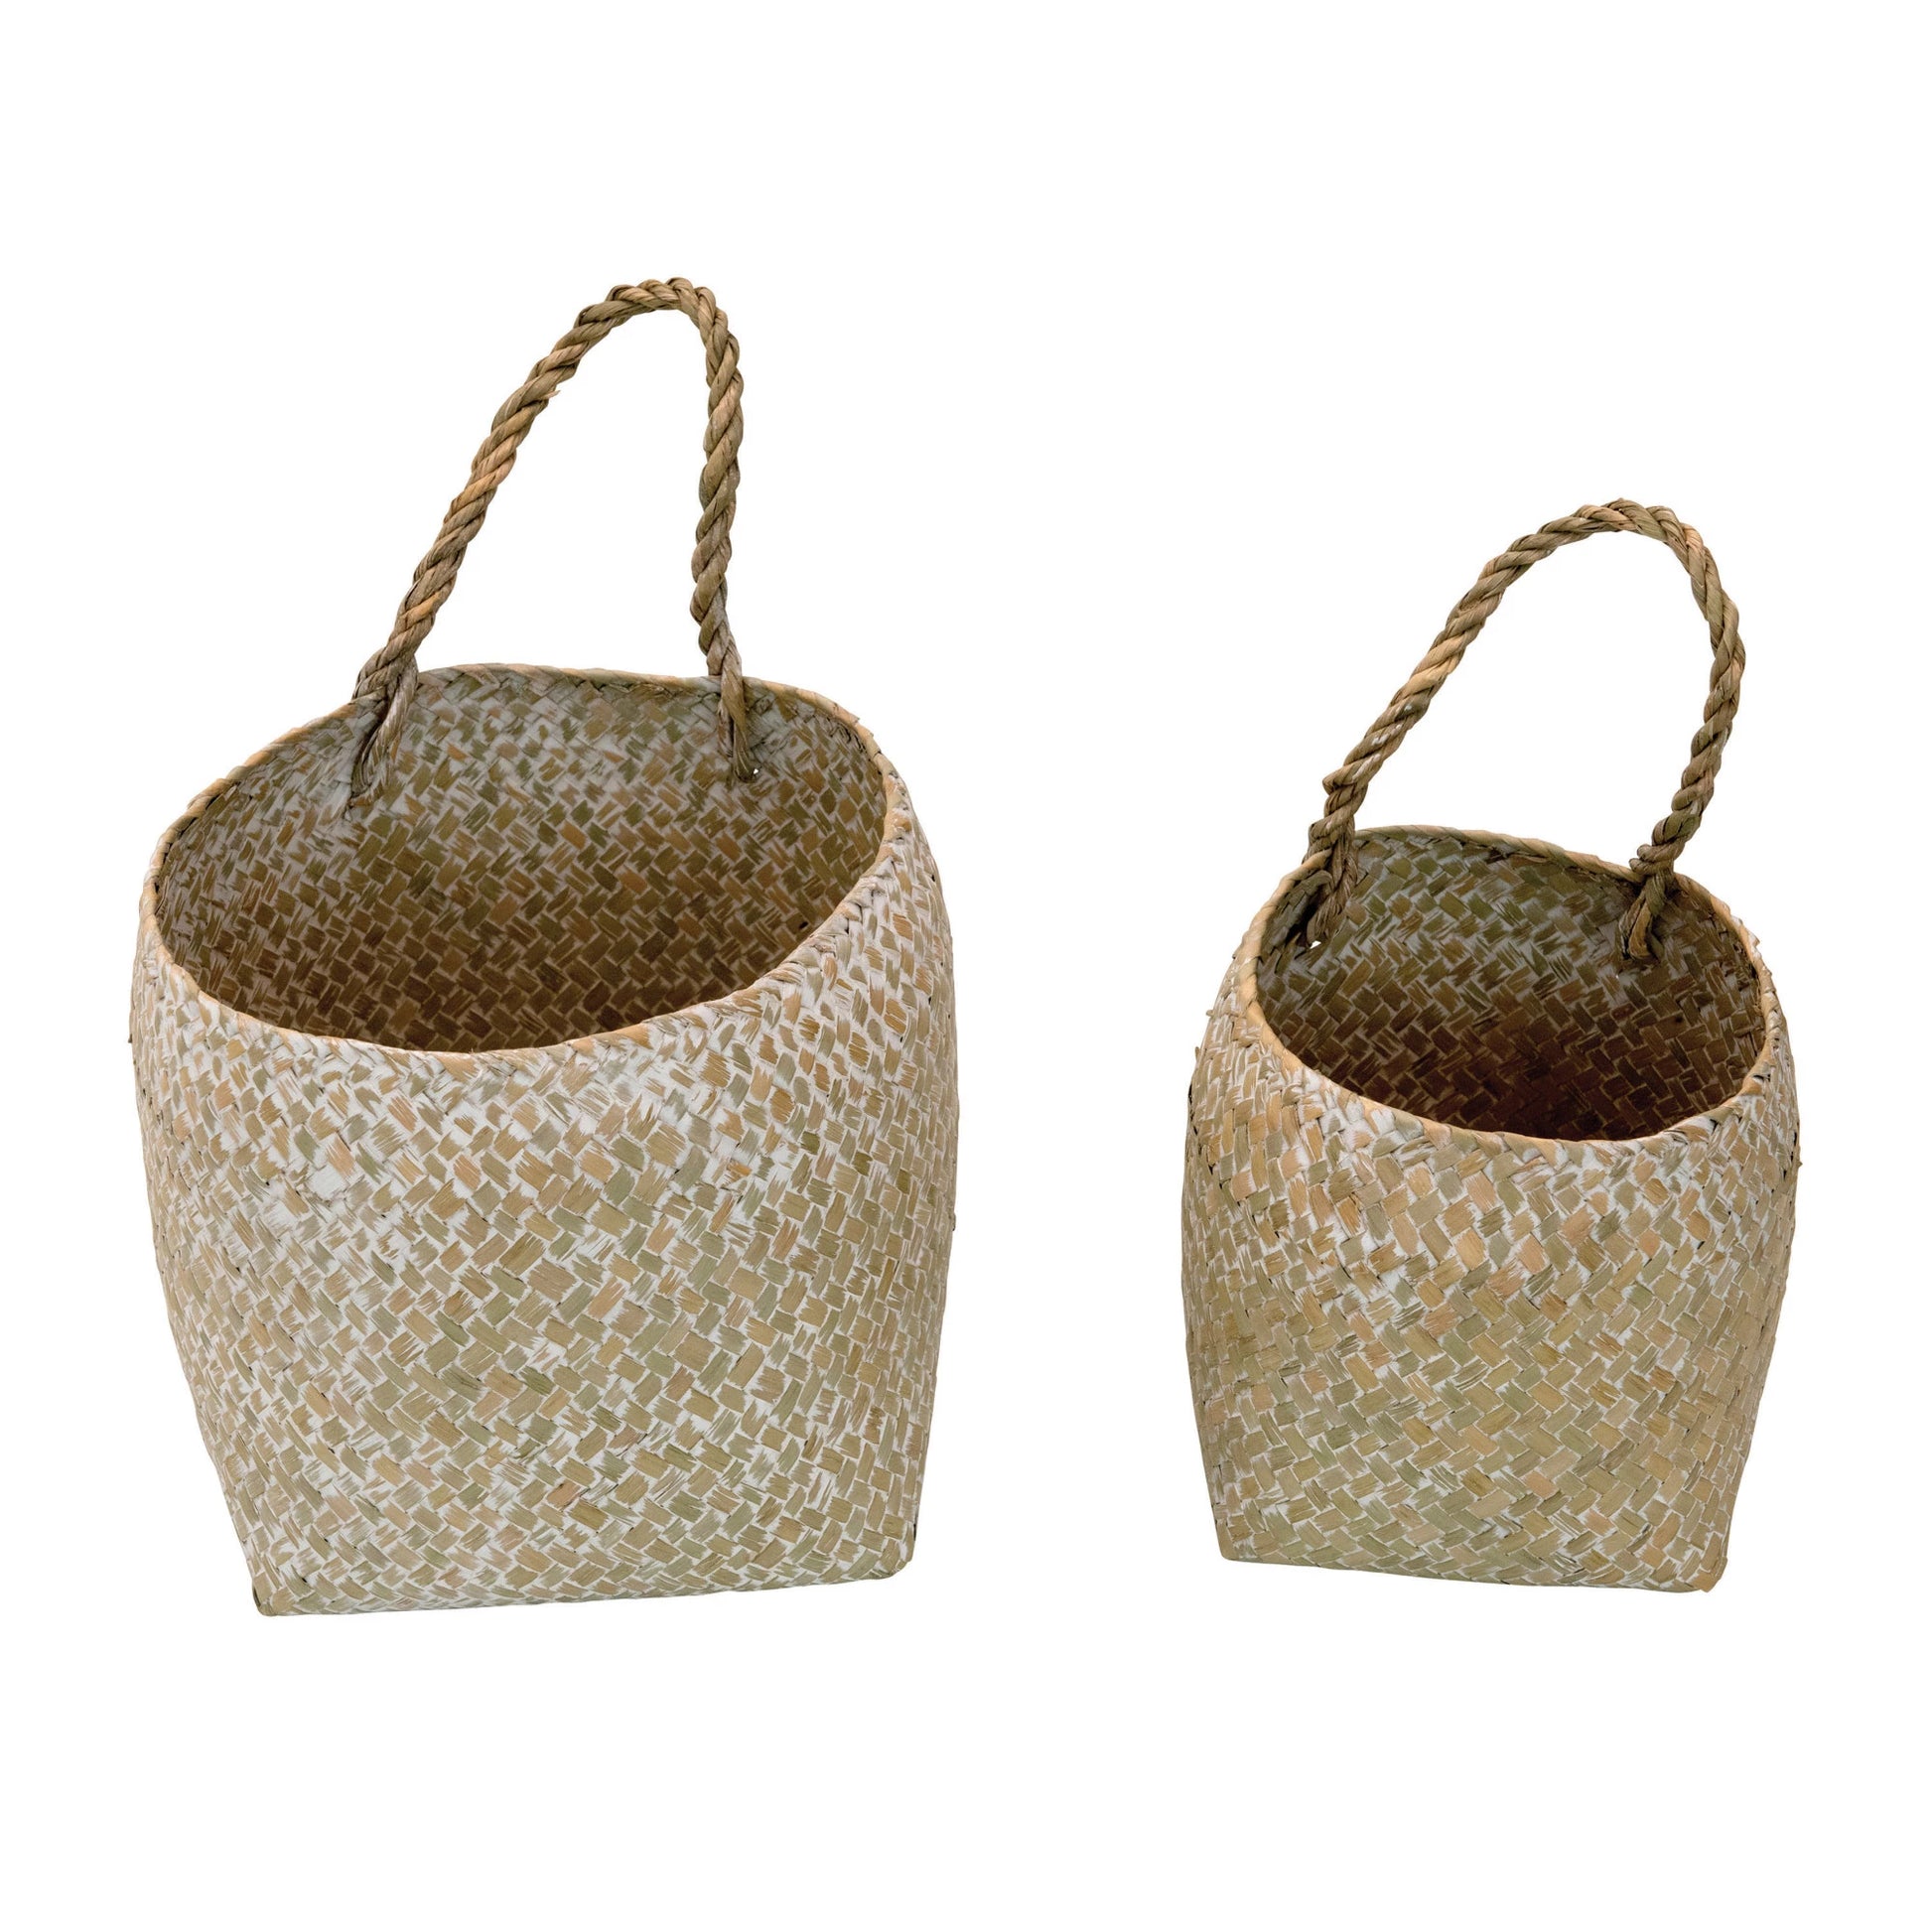 Hand Woven Wall Baskets, The Feathered Farmhouse